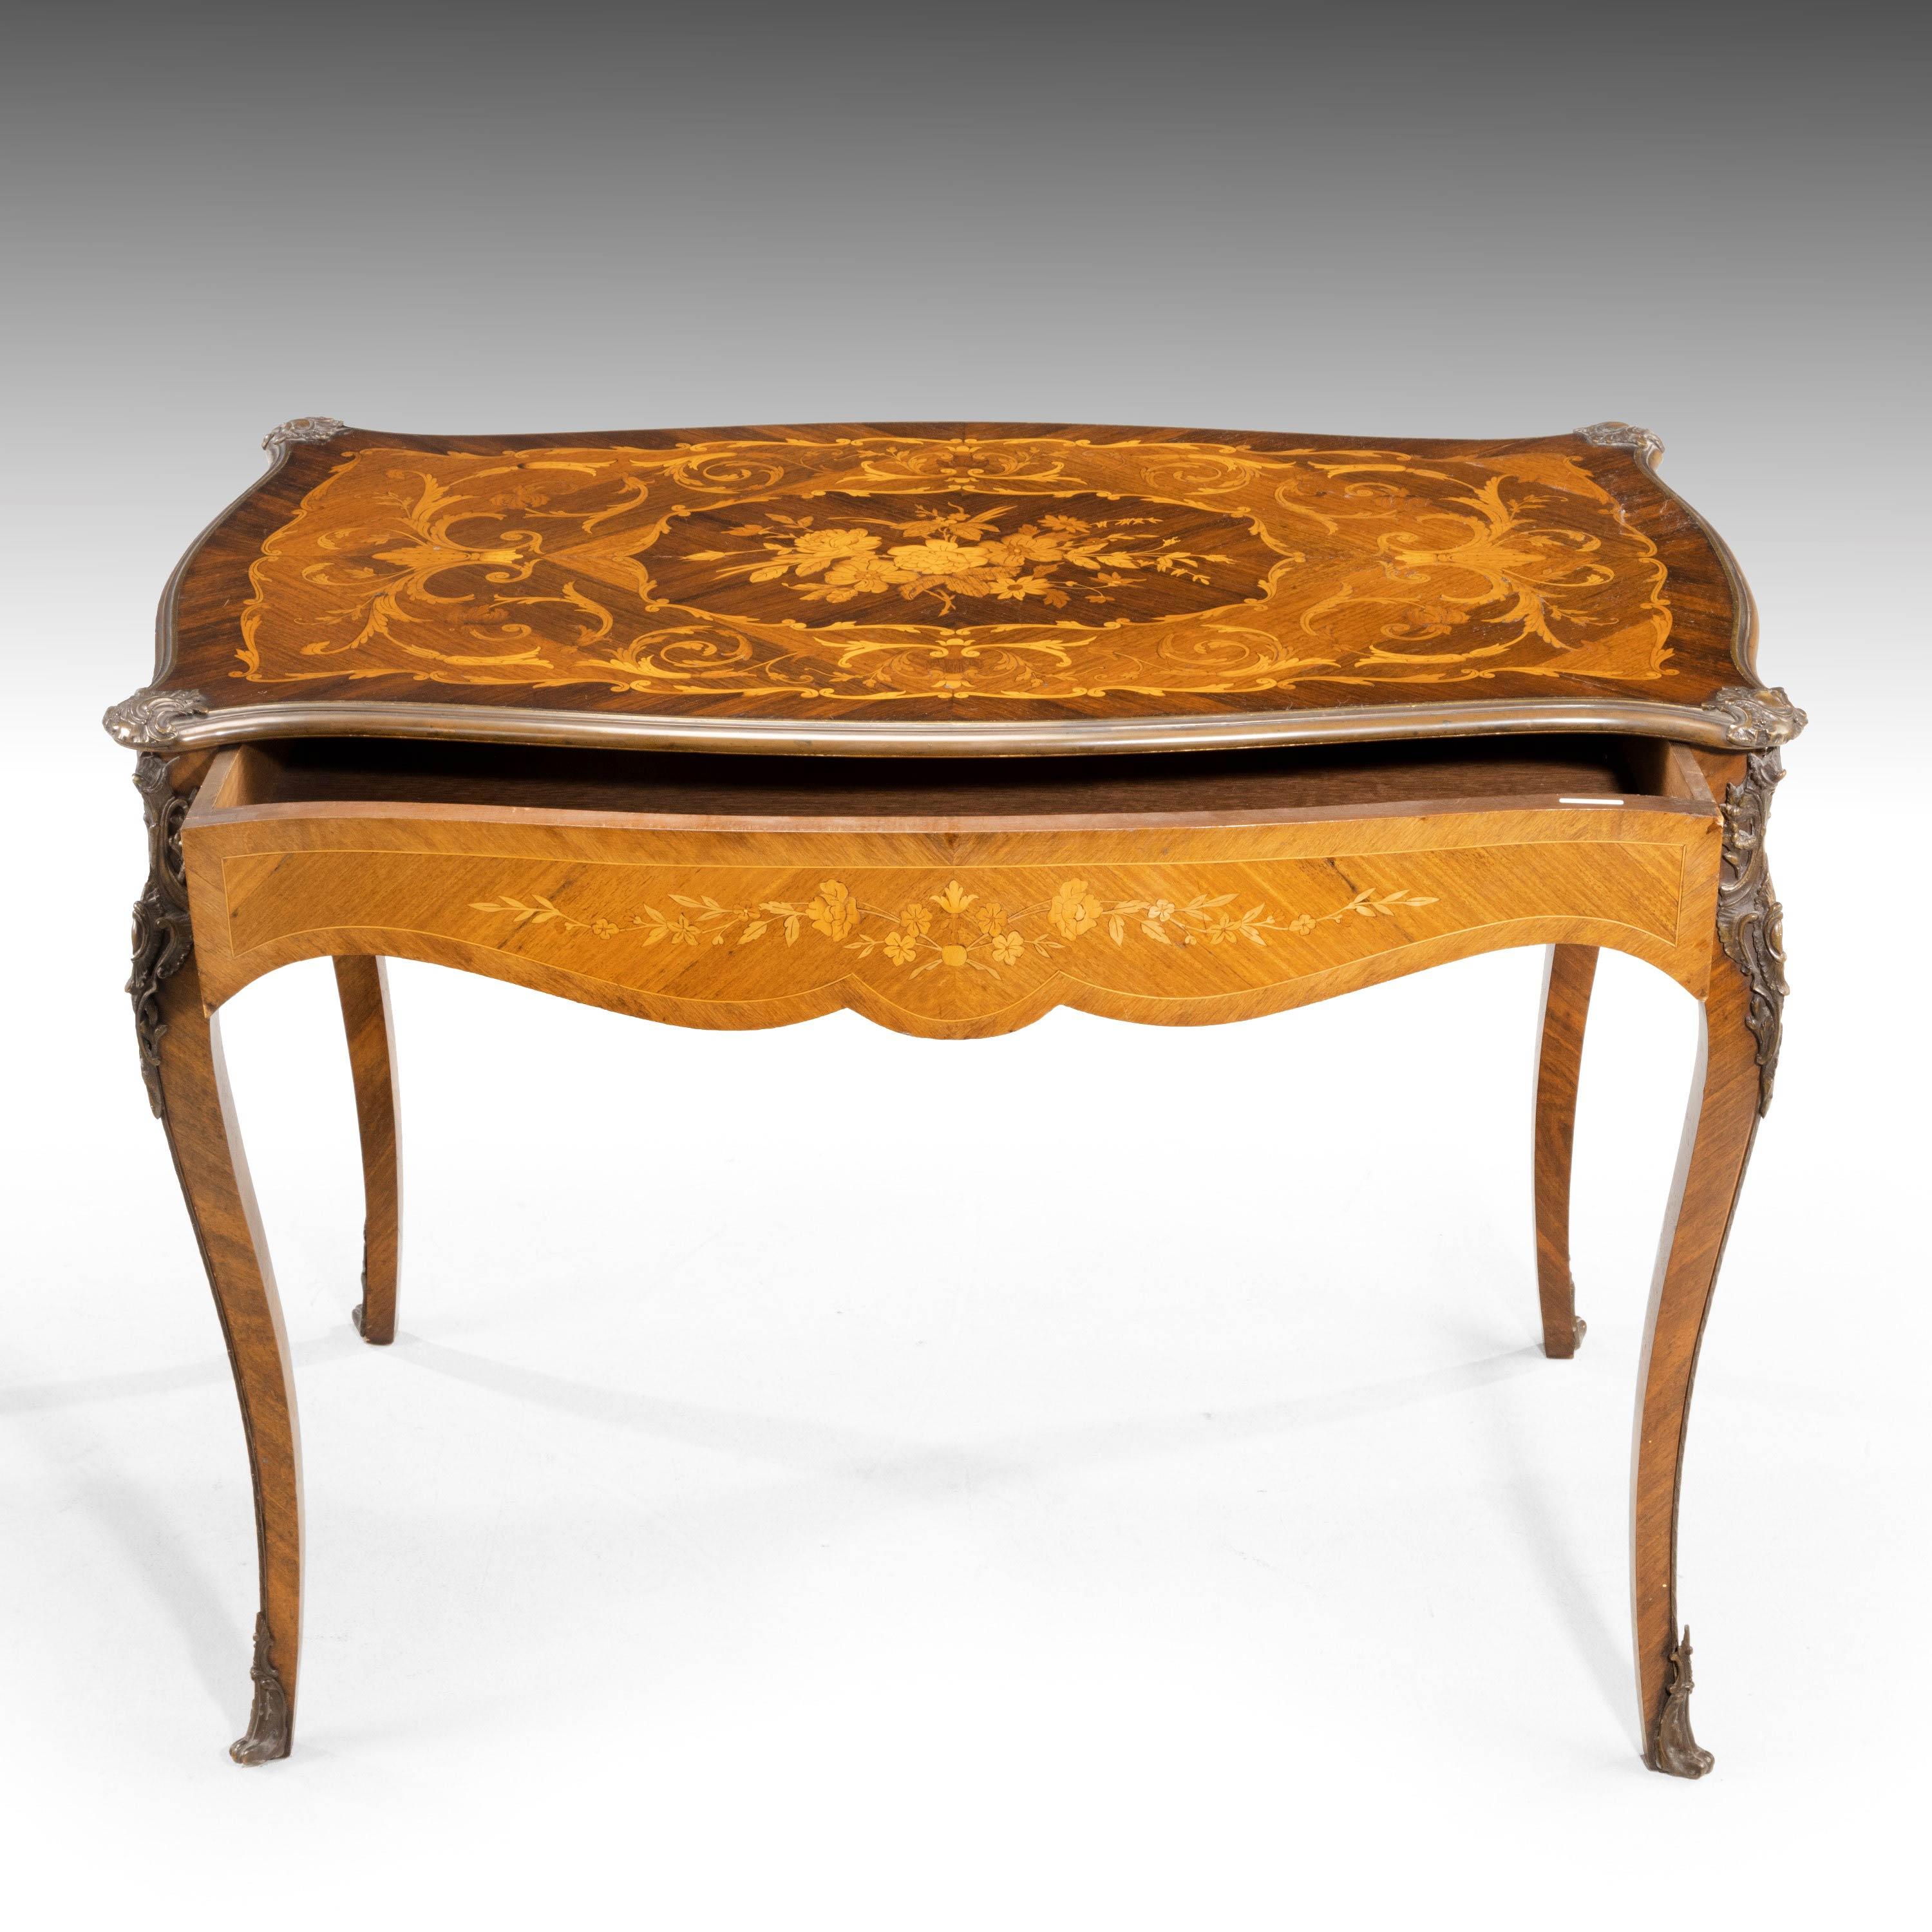 A quite exceptional Kingwood, rosewood and exotically timbered centre table. Retaining all of its original gilt bronze mounts and sabots, now oxidised to a rich deep bronze color. Quite outstanding calibre marquetry top of foliage and flowers. The